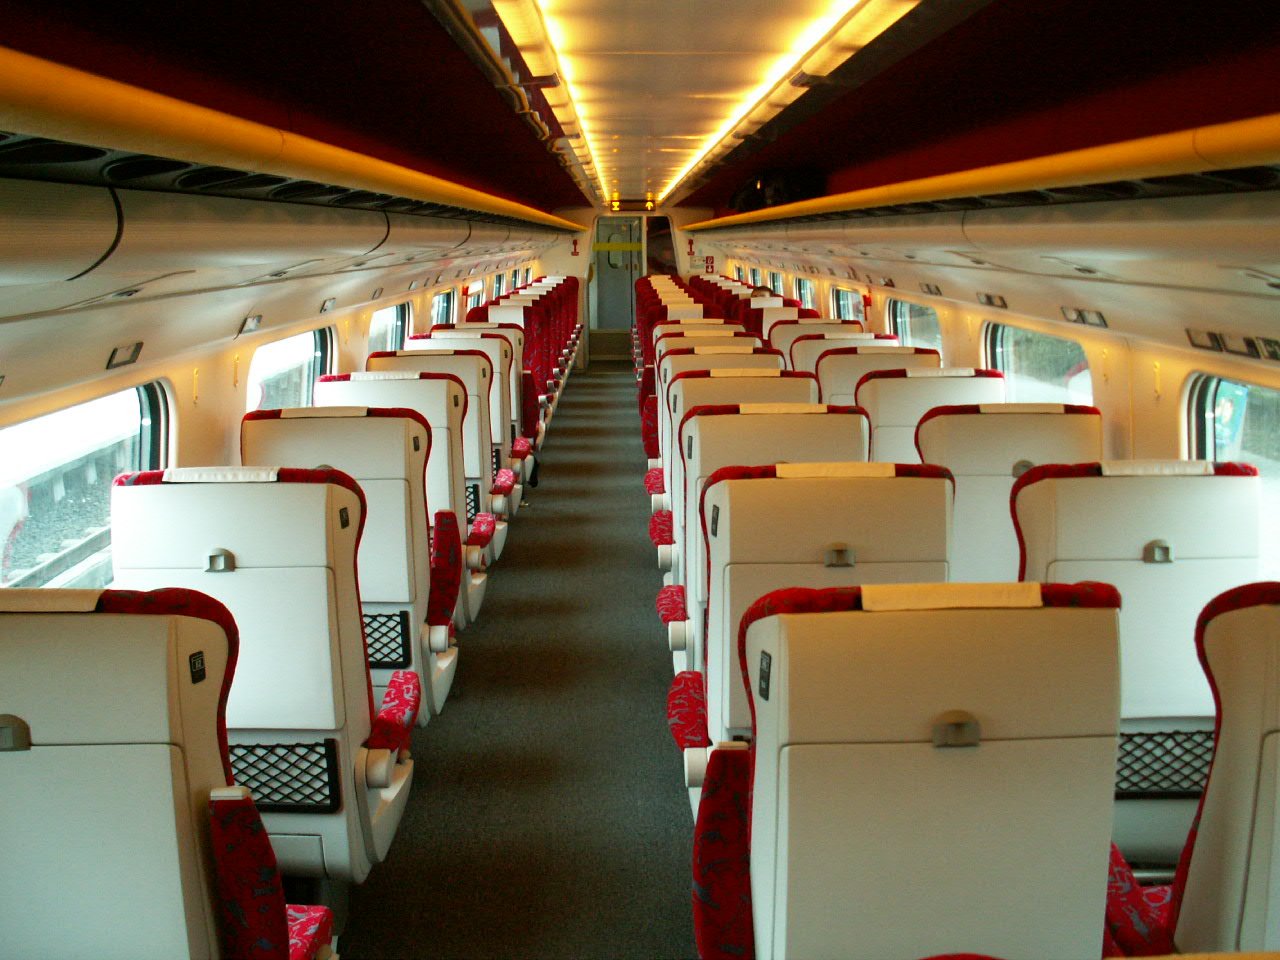 seats and desks in an empty train car